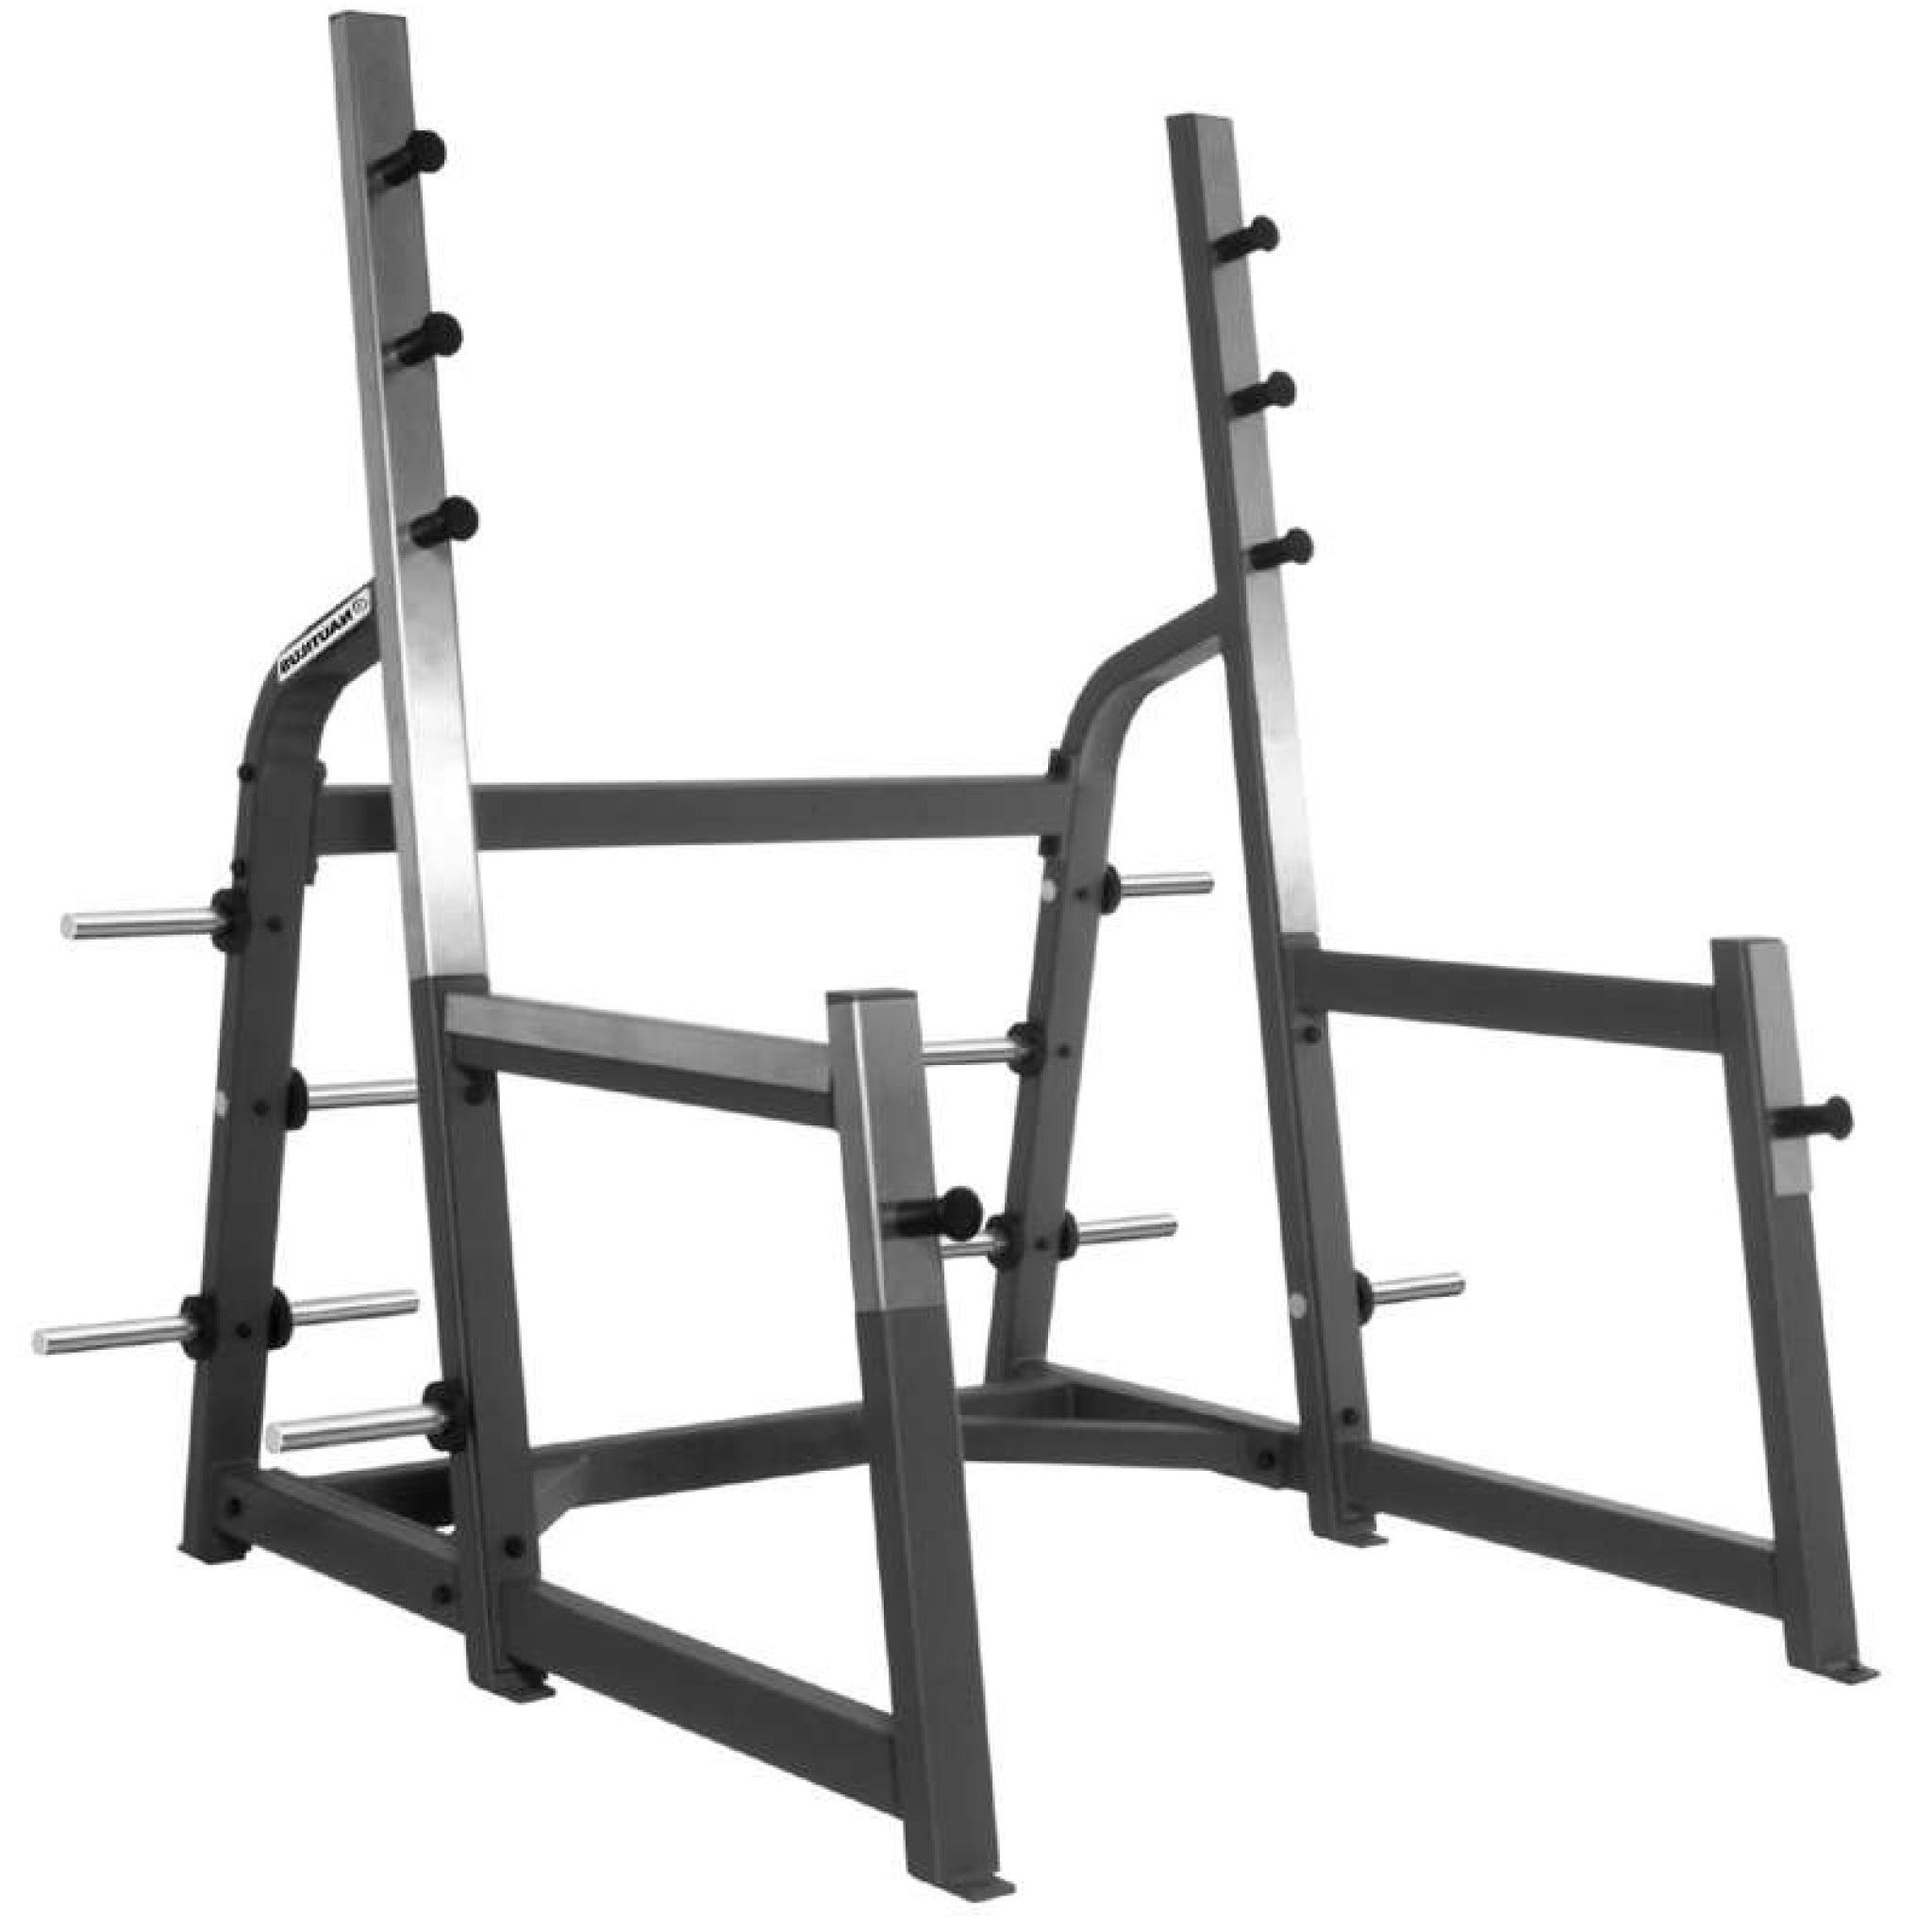 Used Nautilus Olympic Squat Rack for Sale | Gym Supply